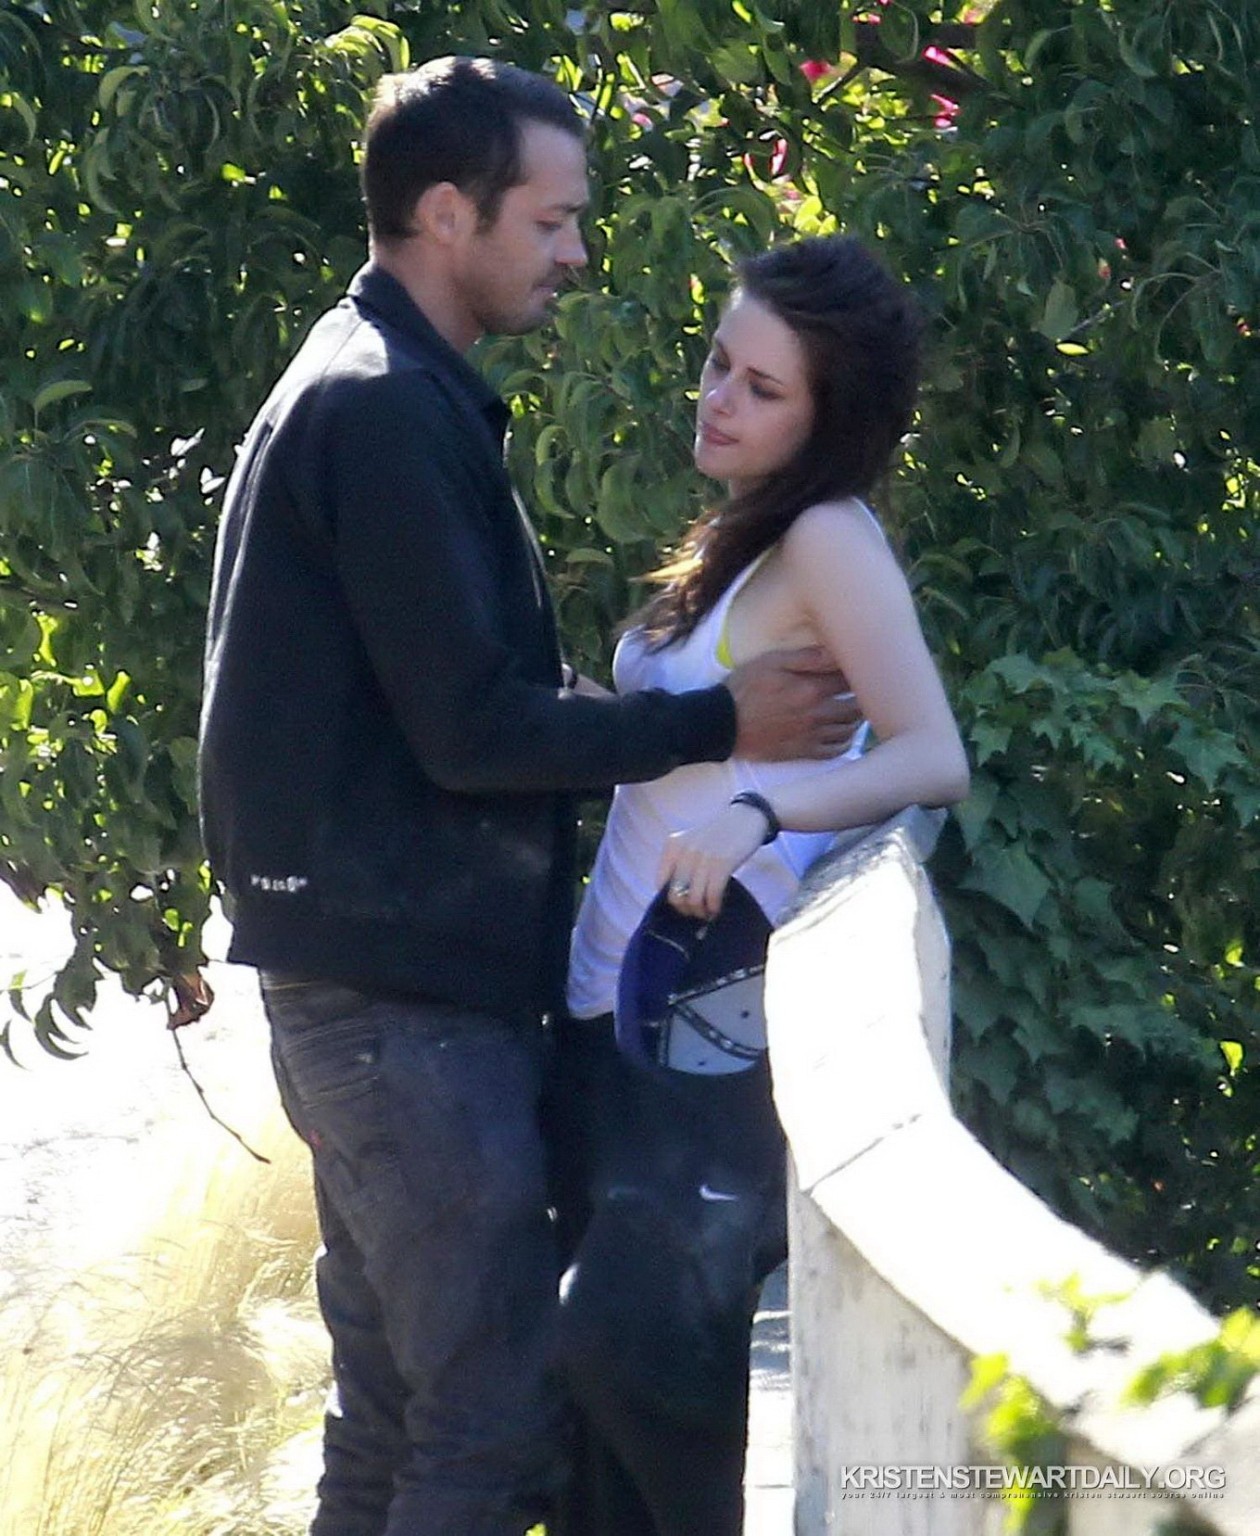 Kristen stewart getting groped dry humped on the side of the road
 #75256341